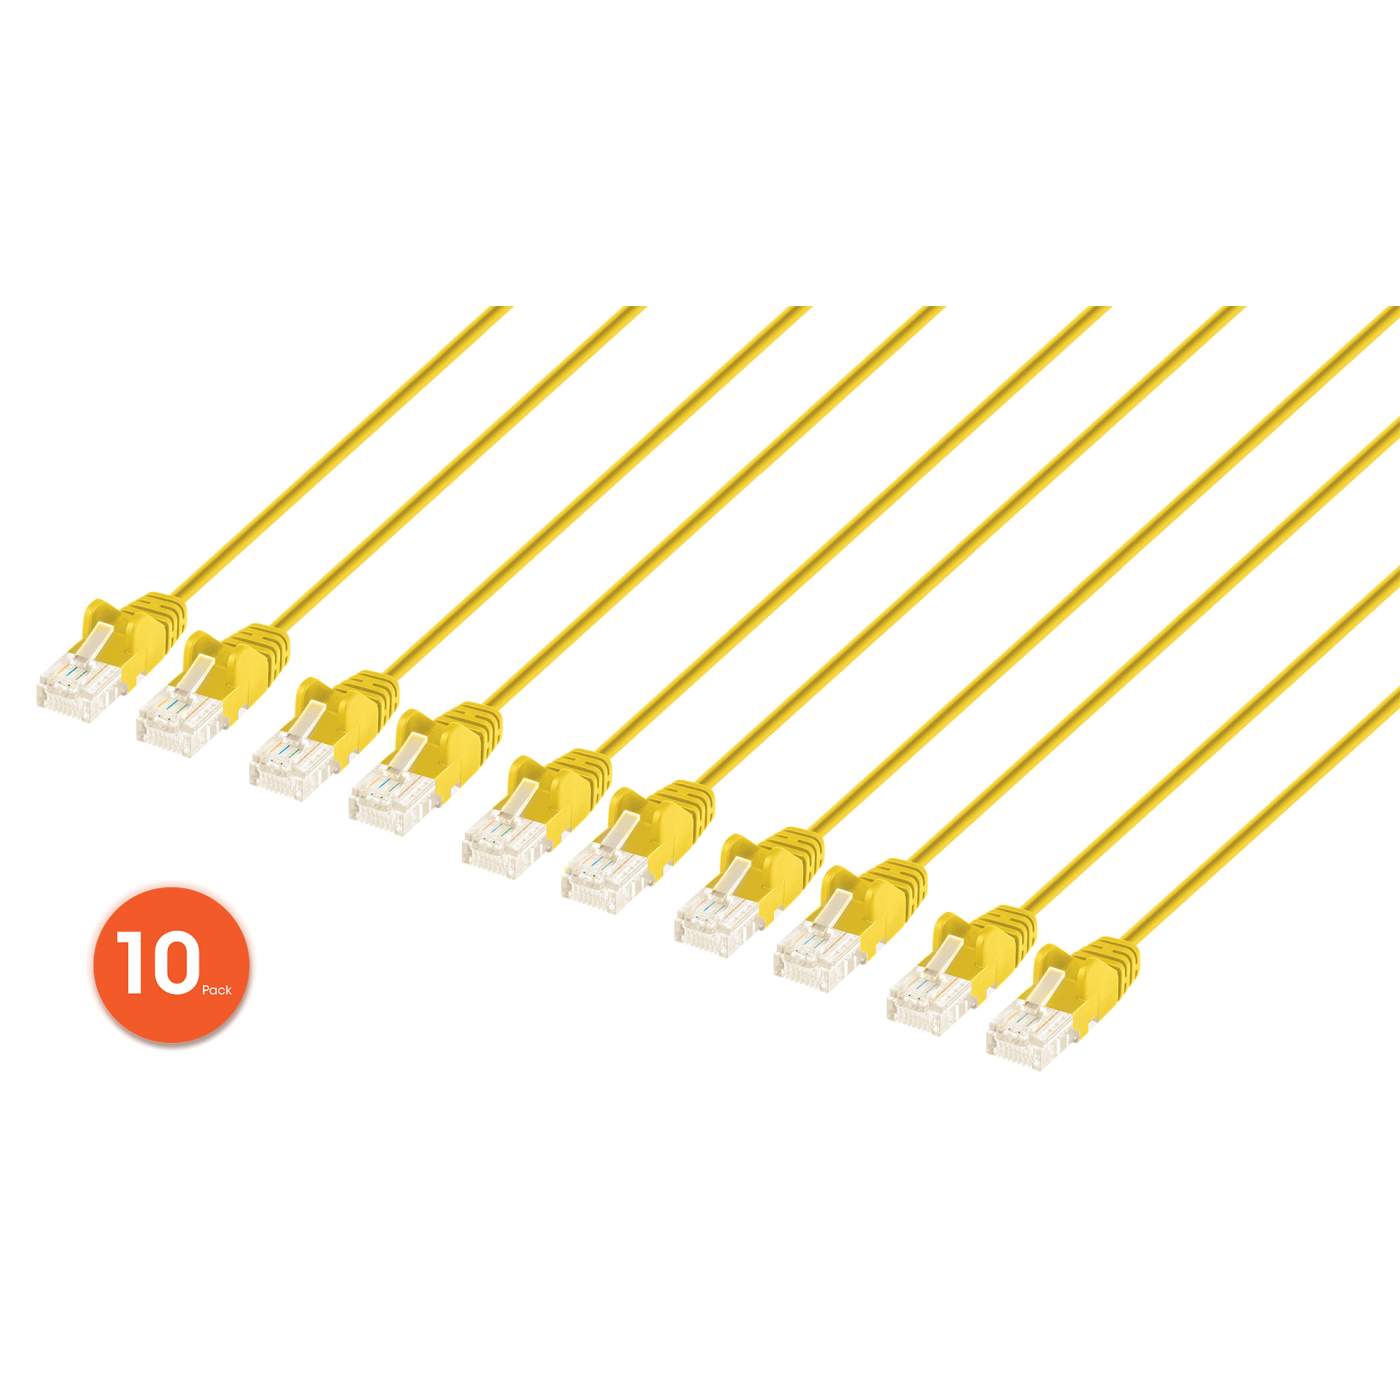 Cat6 U/UTP Slim Network Patch Cable, 14 ft., Yellow, 10-Pack Image 1